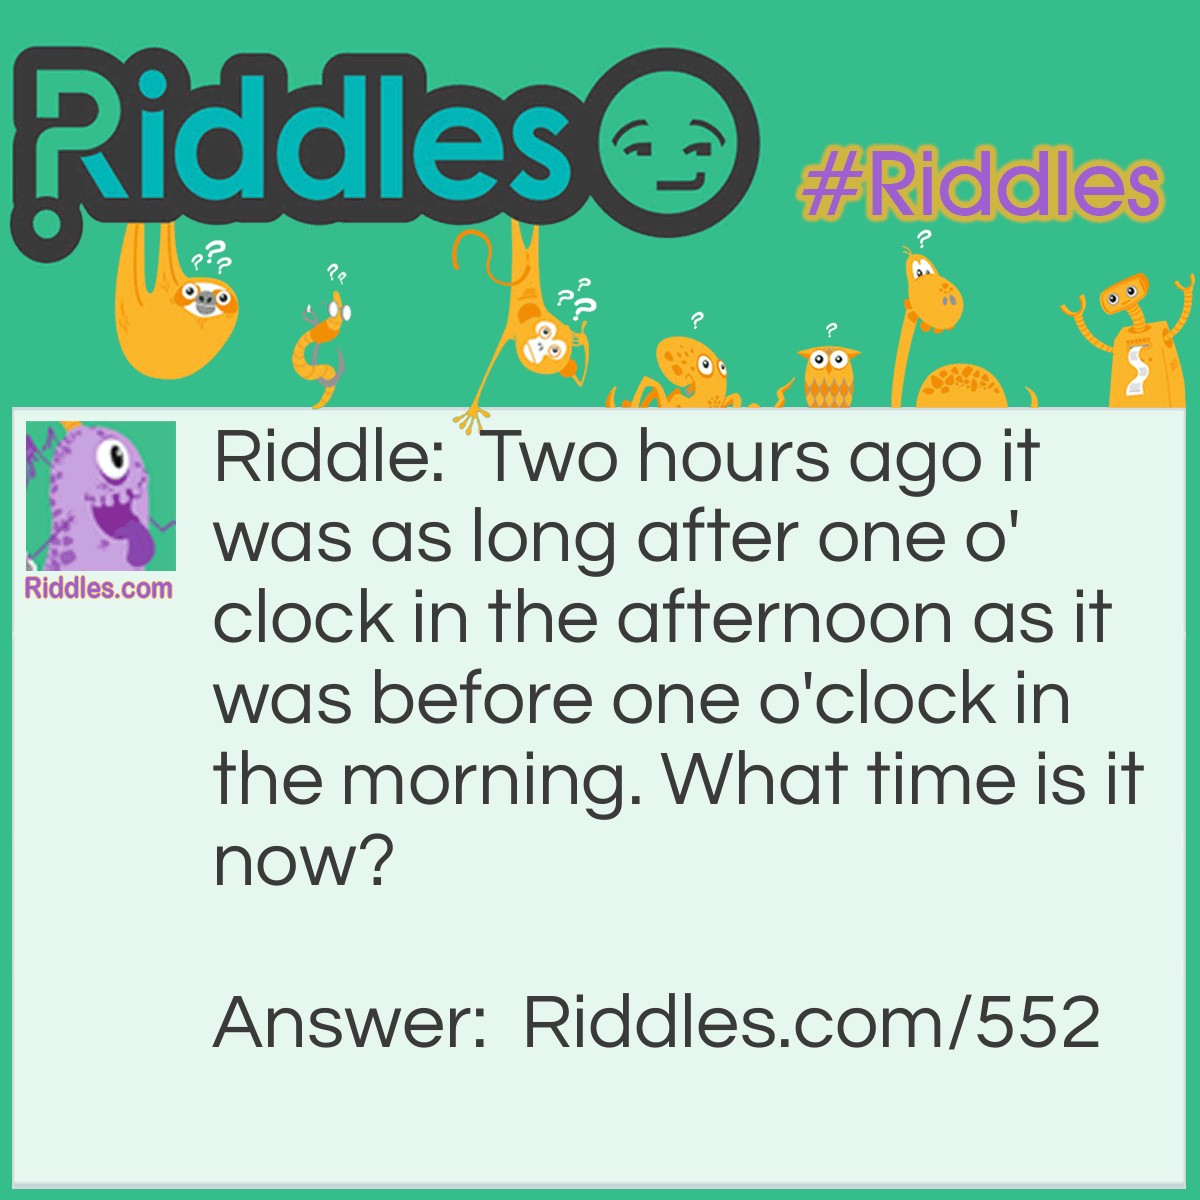 Riddle: Two hours ago it was as long after one o'clock in the afternoon as it was before one o'clock in the morning. What time is it now? Answer: It would be 9:00 pm. There are 12 hours between 1:00 pm and 1:00 am and half of that is six hours. Half-way between would be 7 o'clock. Two hours later it would be 9:00 o'clock.